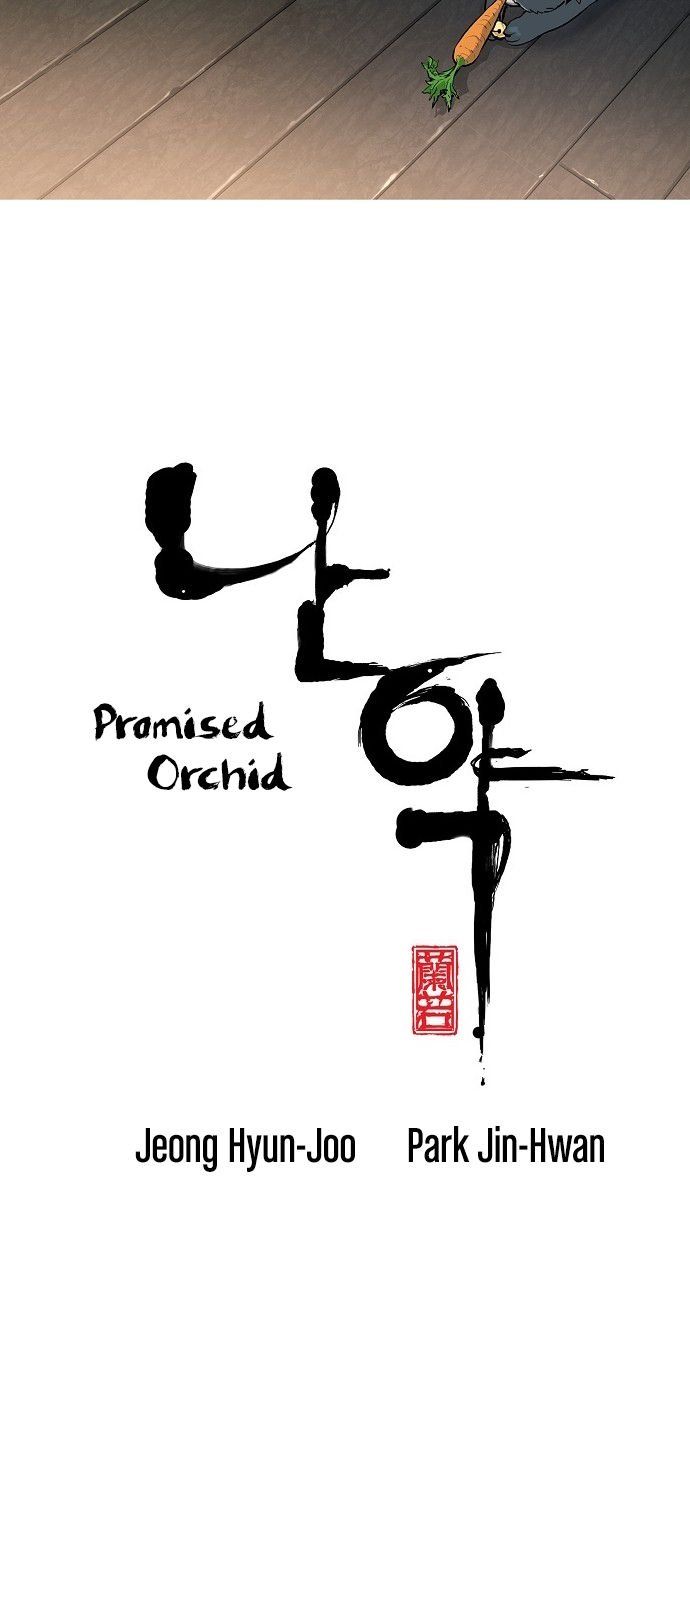 Promised Orchid 11 2